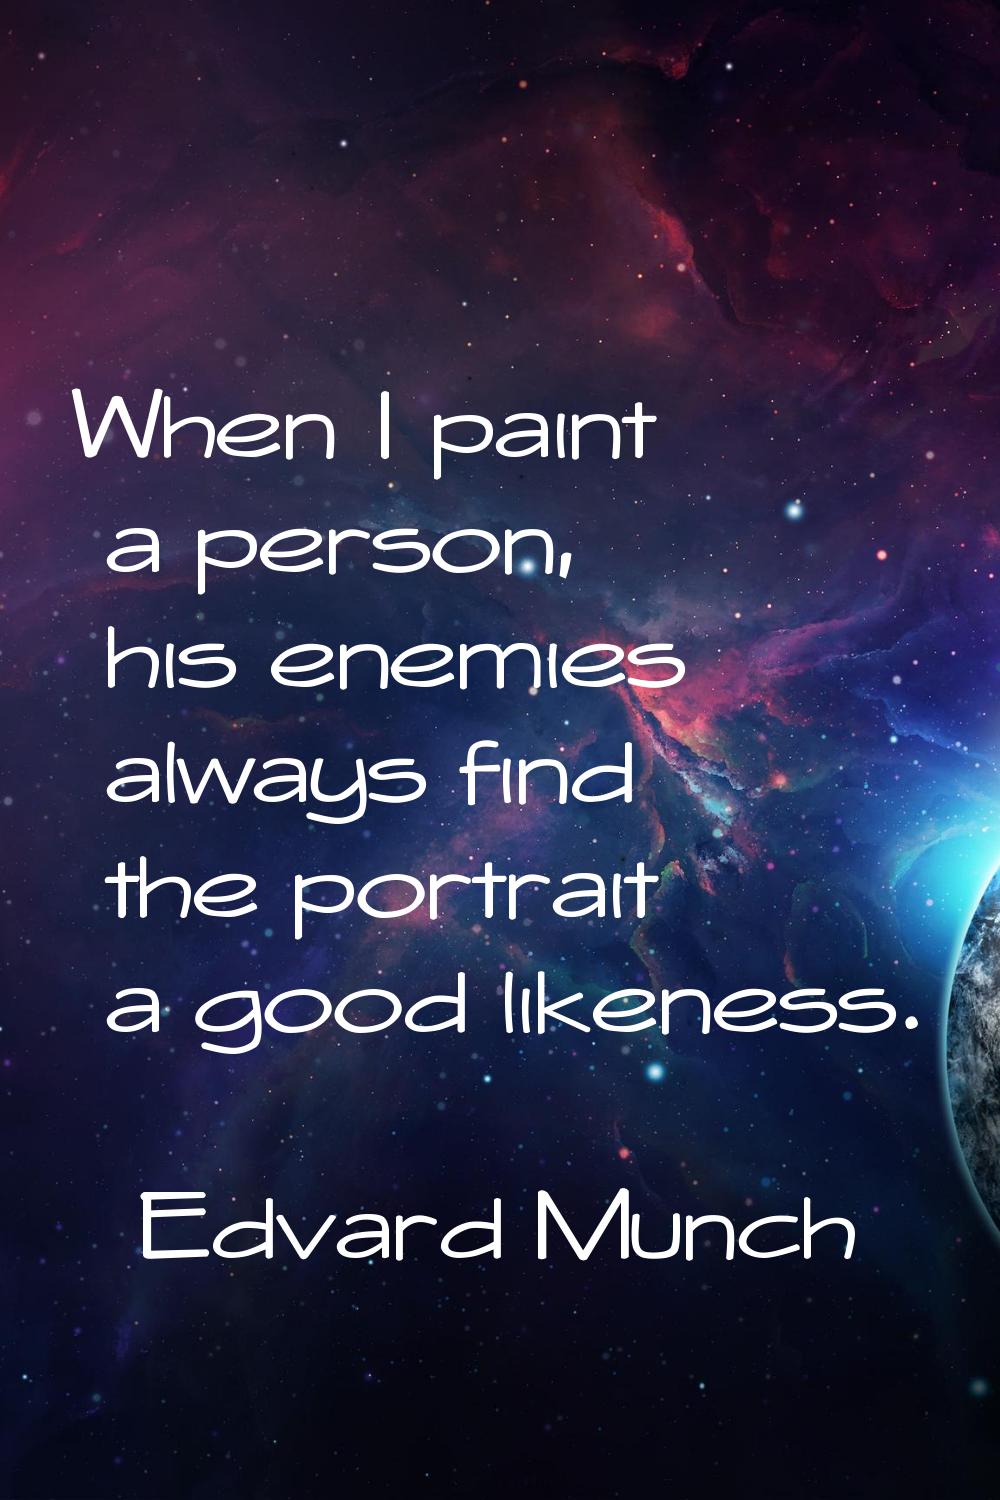 When I paint a person, his enemies always find the portrait a good likeness.